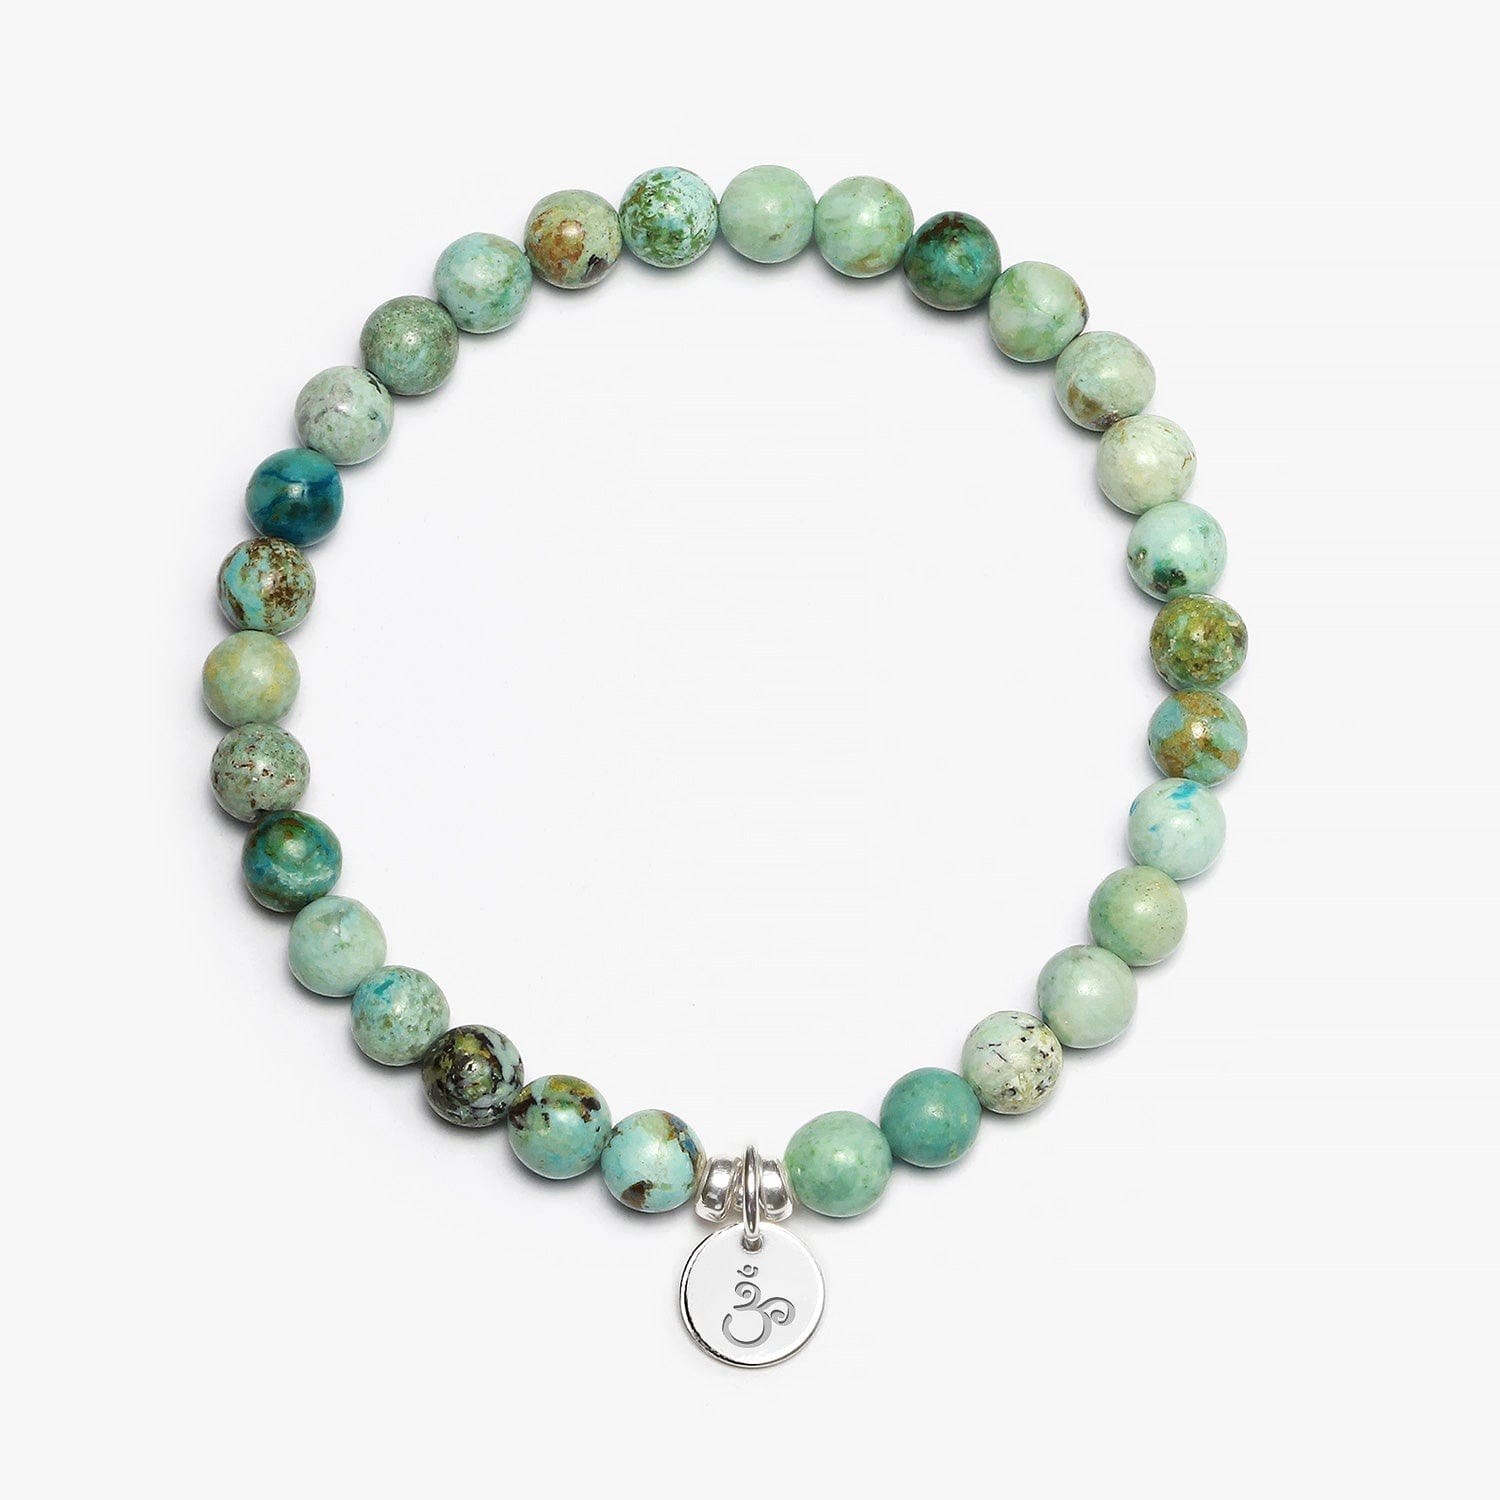 Buy Chrysocolla Bracelet in Natural Pearls 6 Mm 10-19 Cm Smooth  Semi-precious Stone and Round Jewelry Natural Stone Online in India - Etsy